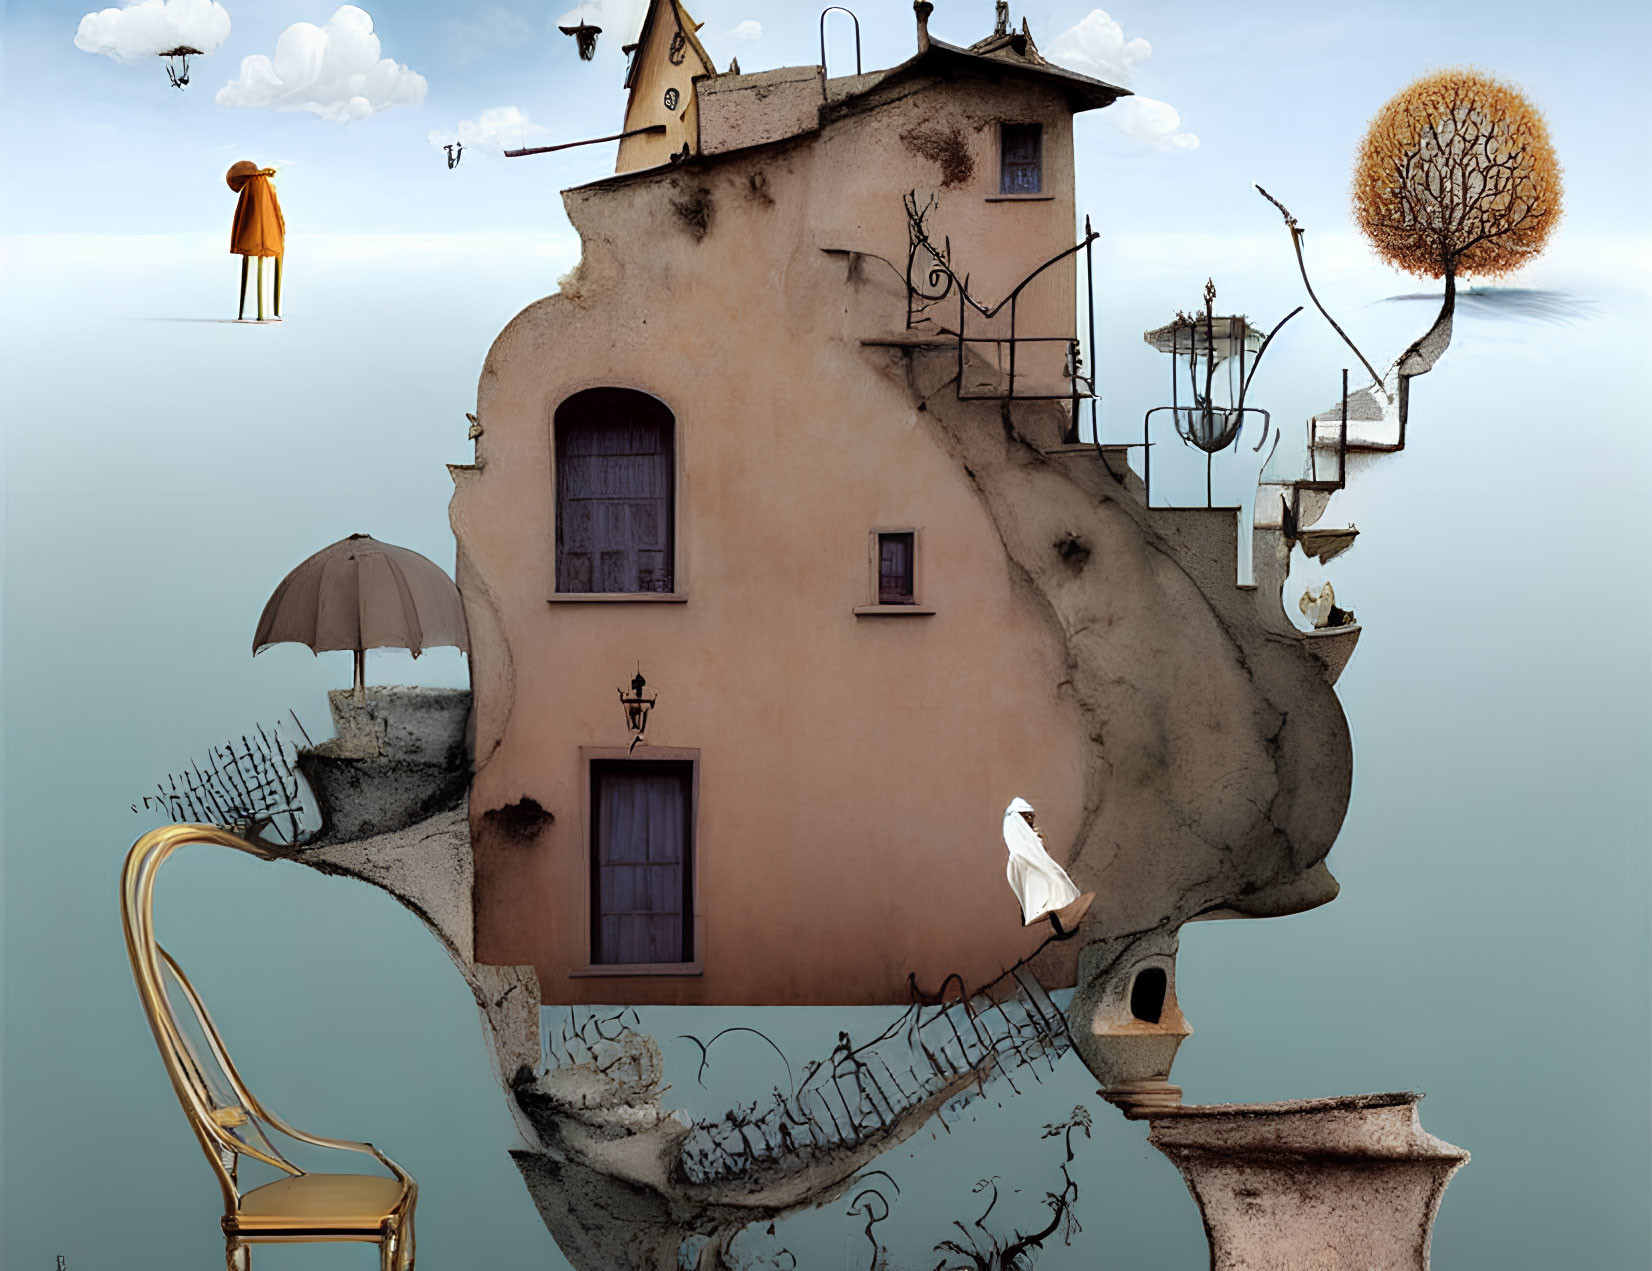 Whimsical face-shaped building with surreal elements